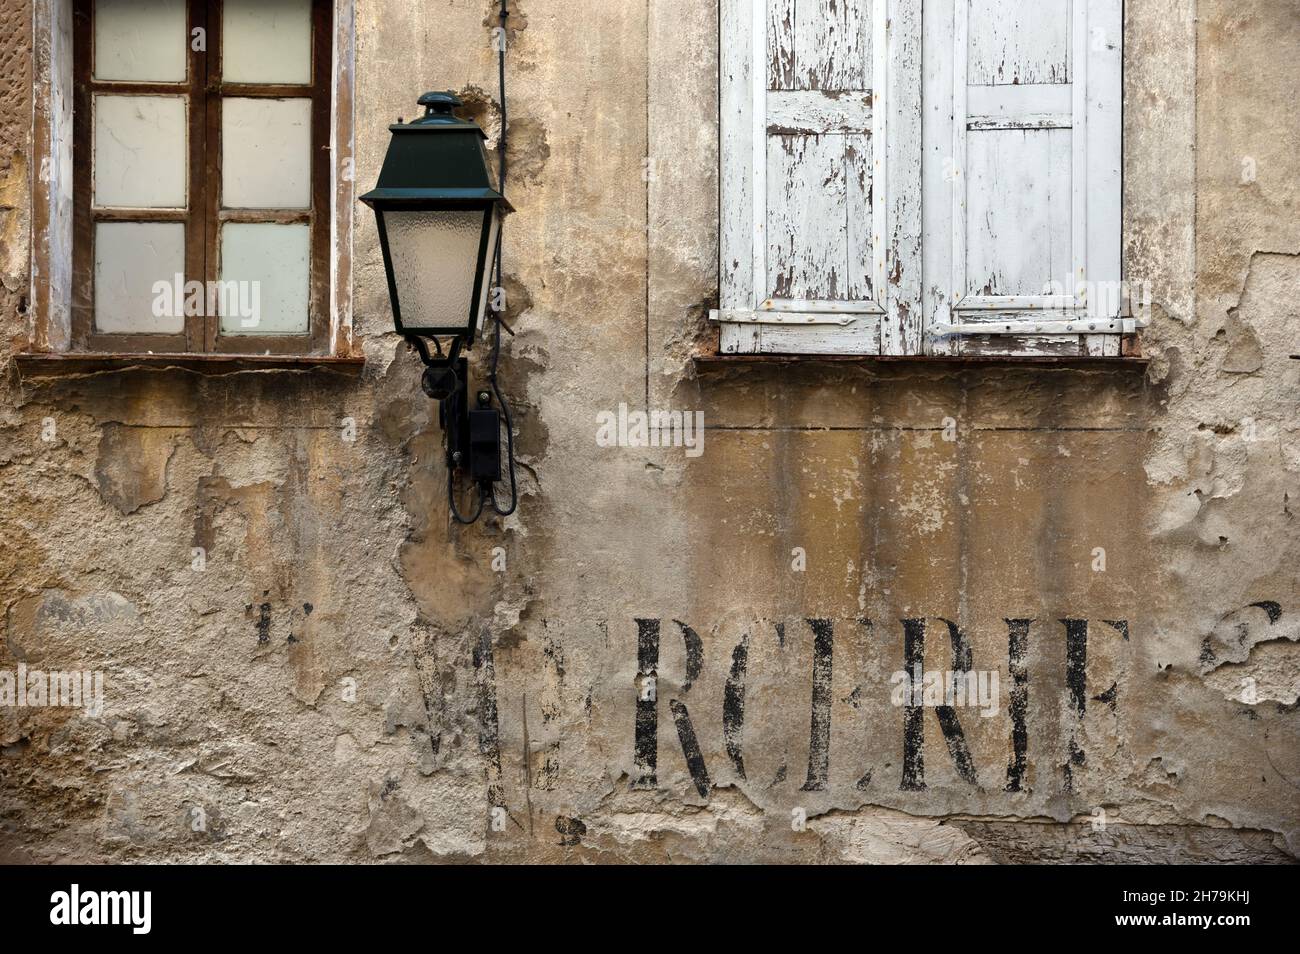 Rundown, Neglected, Dilapidated or Abandoned Facade of Village House in the Old Town Annot Alpes-de-Haute-Provence Provence France Stock Photo